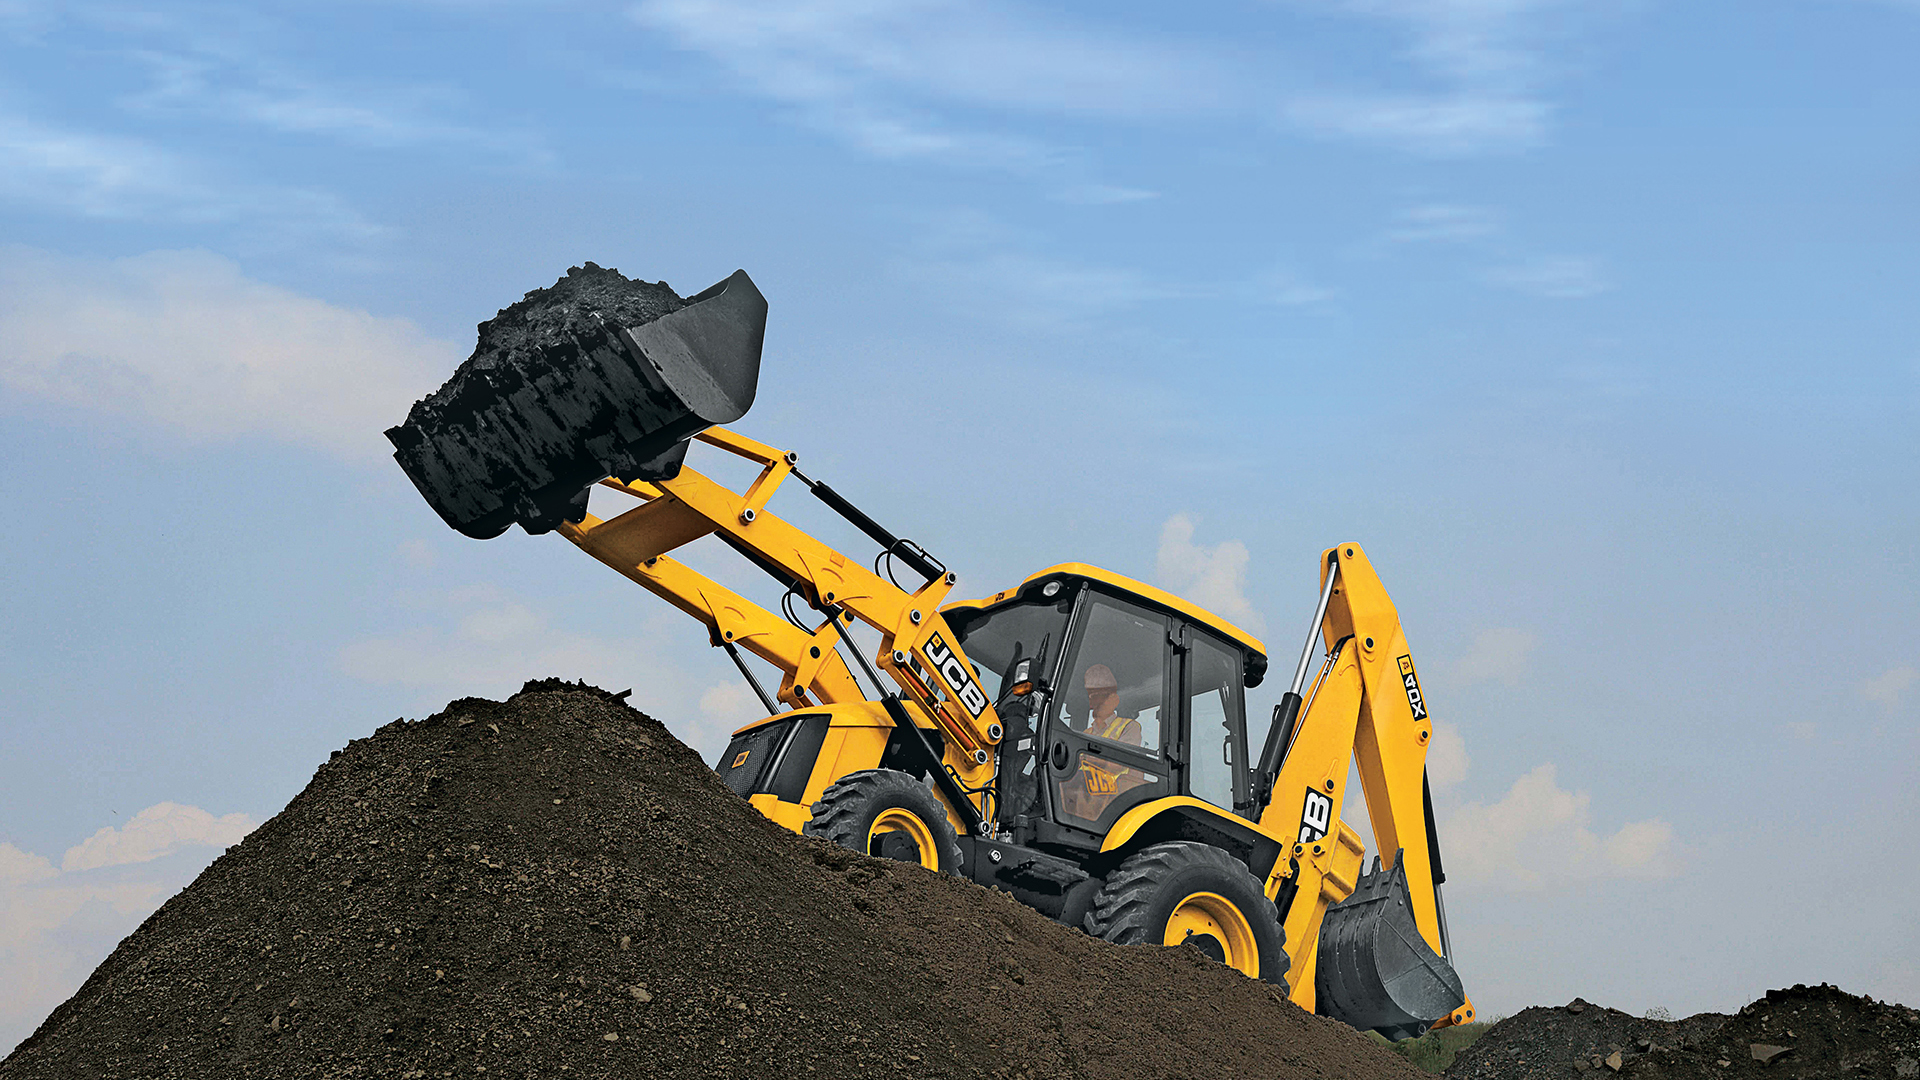 Jcb Images Wallpapers